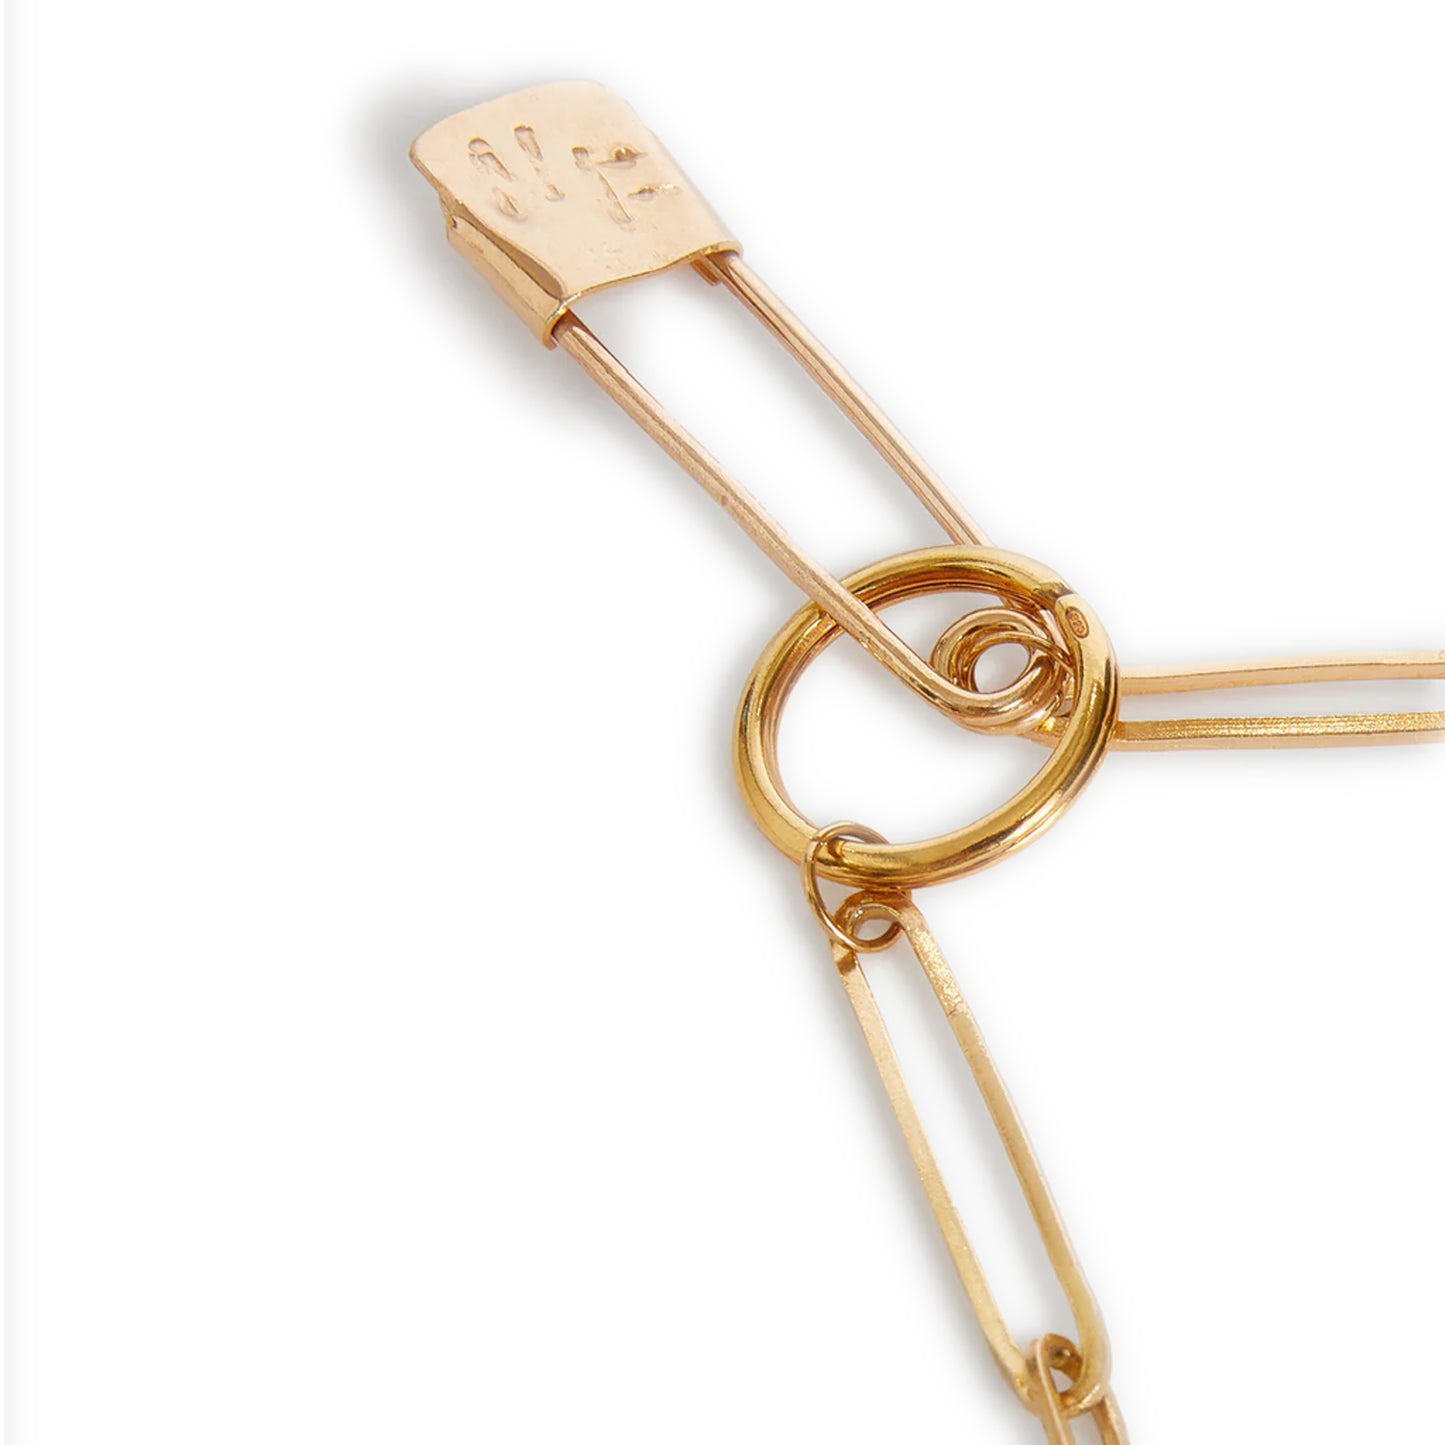 VITTRICIO KEY CHAIN Gold Galvanic paper clip key chain  NF hand carved detail on safety pin  Safety pin closure  Country of origin: Italy